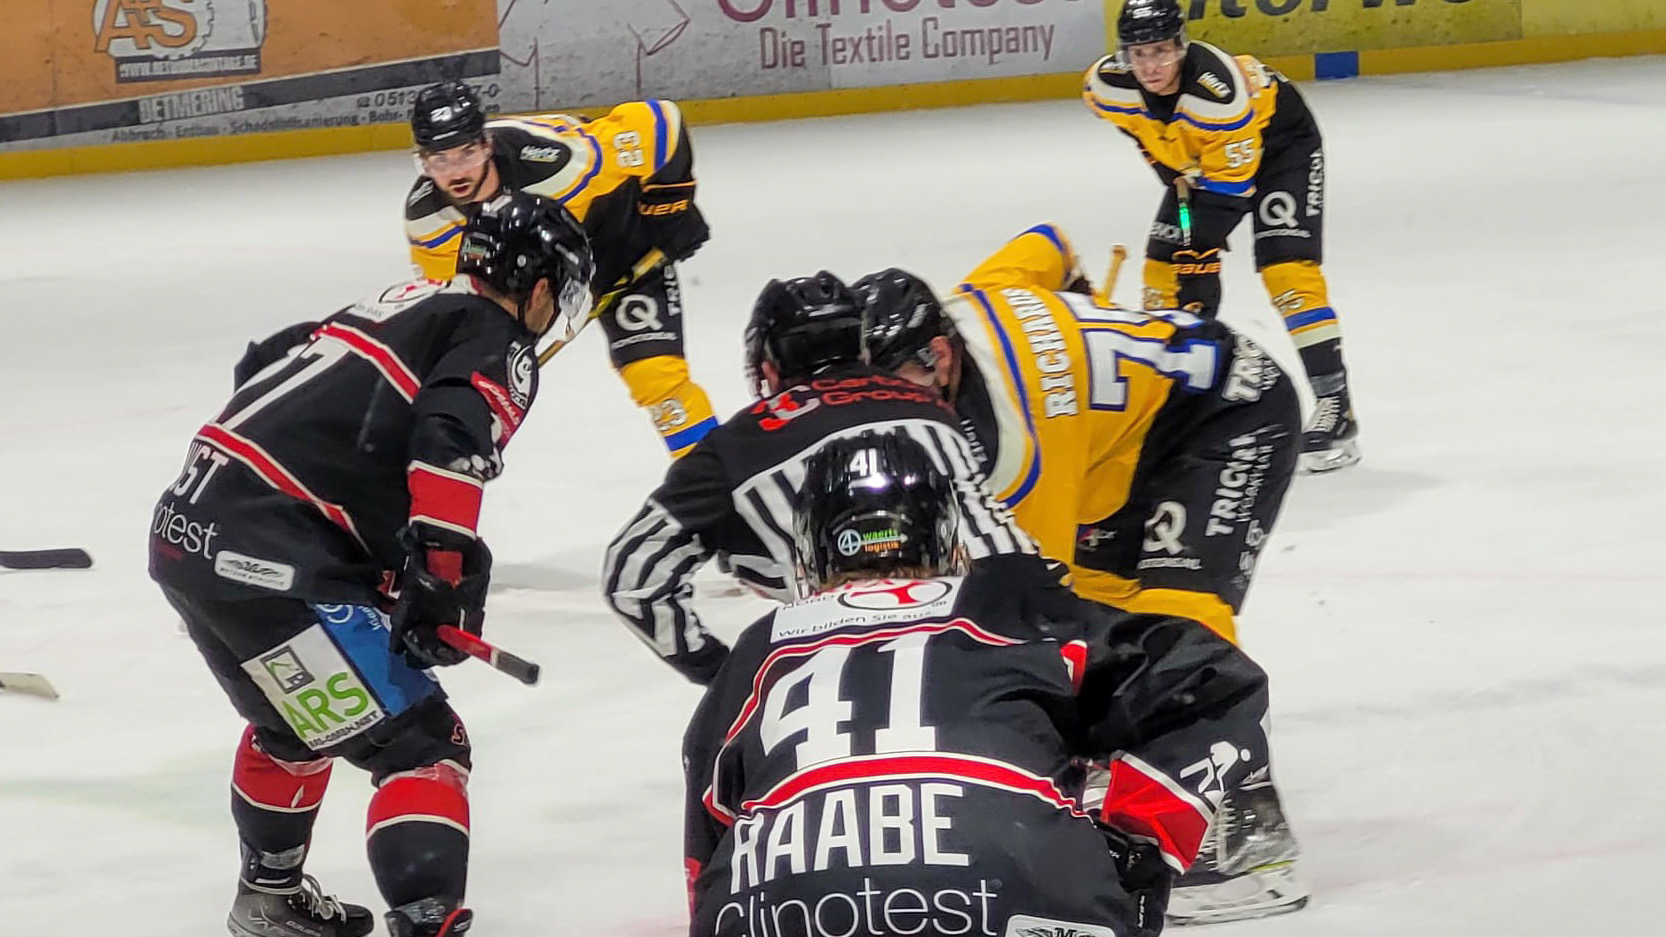 Hannover Scorpions vs. Tilburg Trappers (5-1)